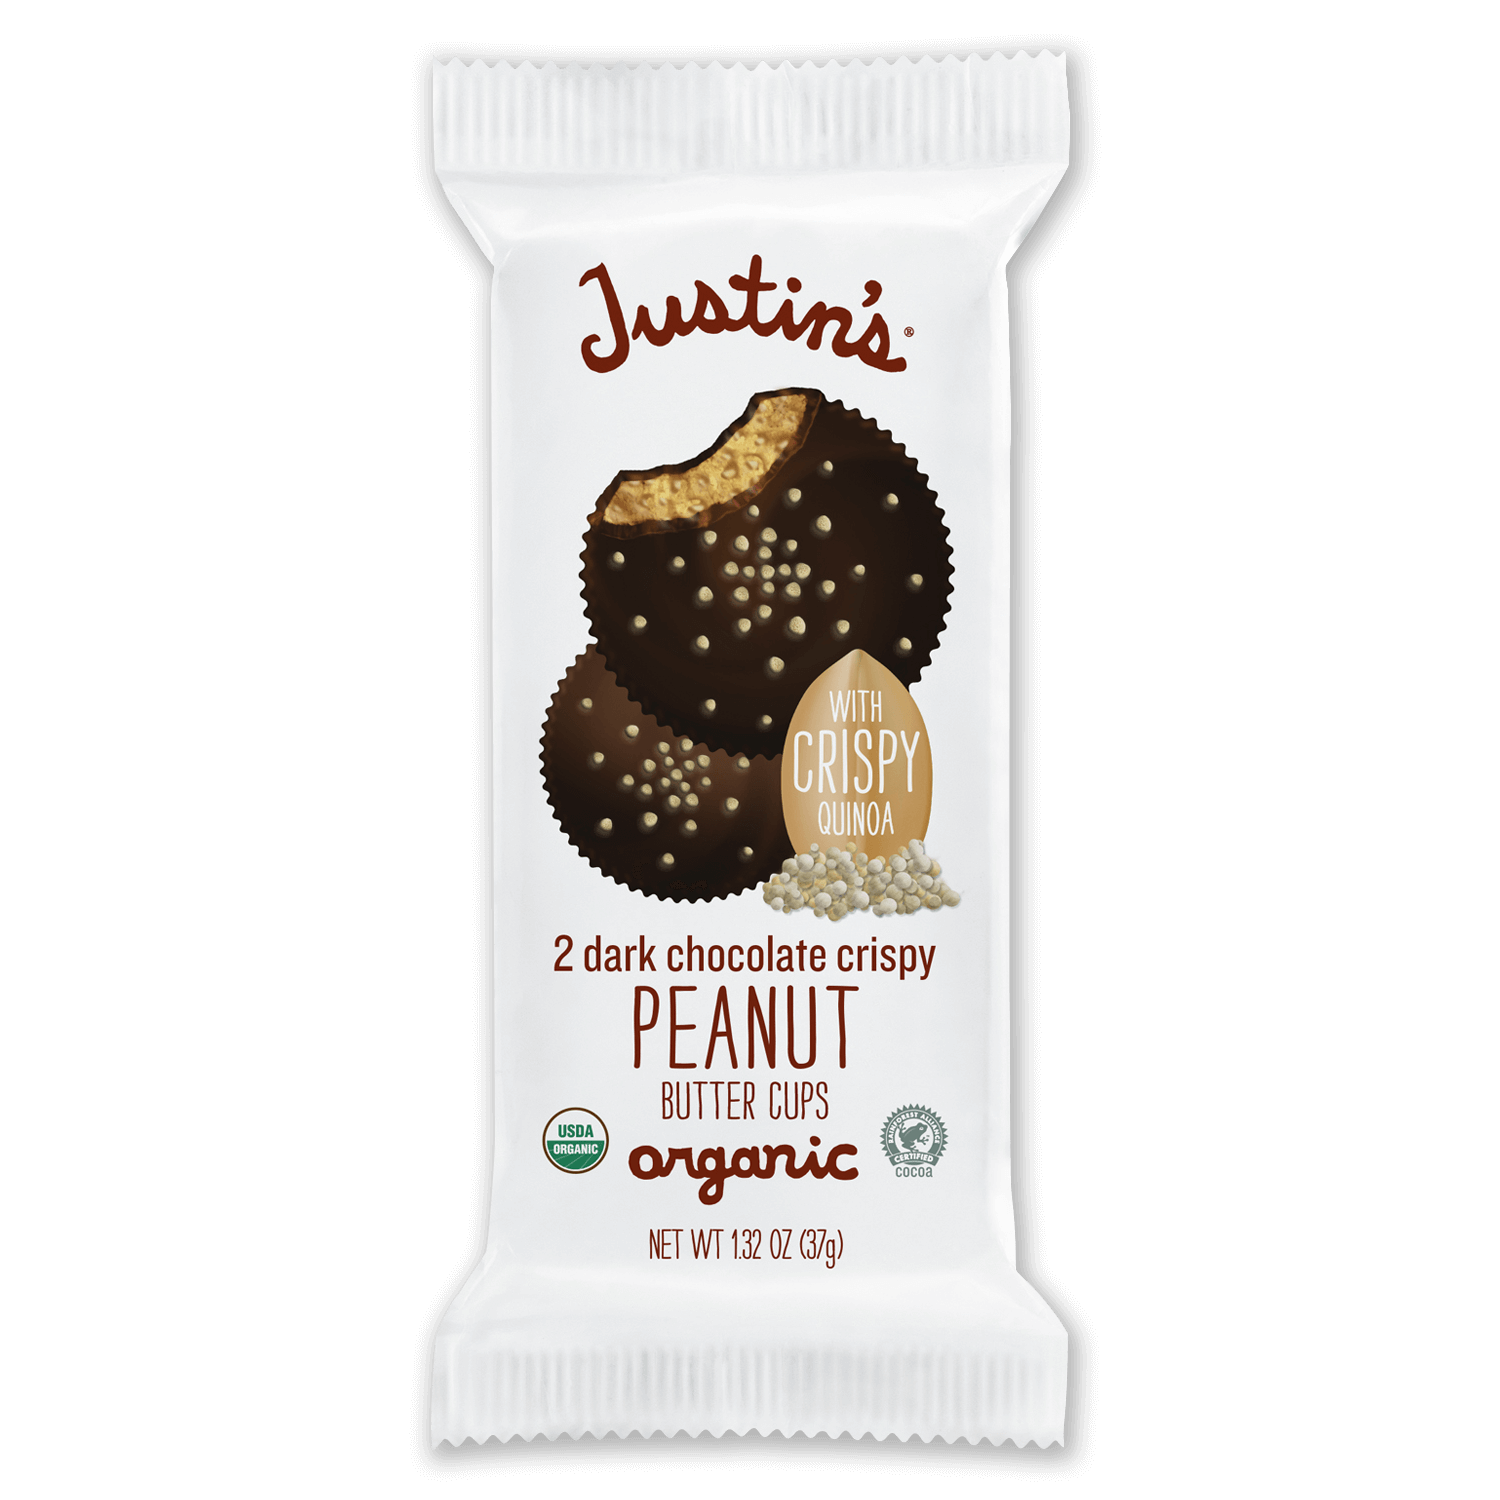 Justin's Dark Chocolate Crispy Peanut Butter Cups 2-piece packages 1.32 oz.